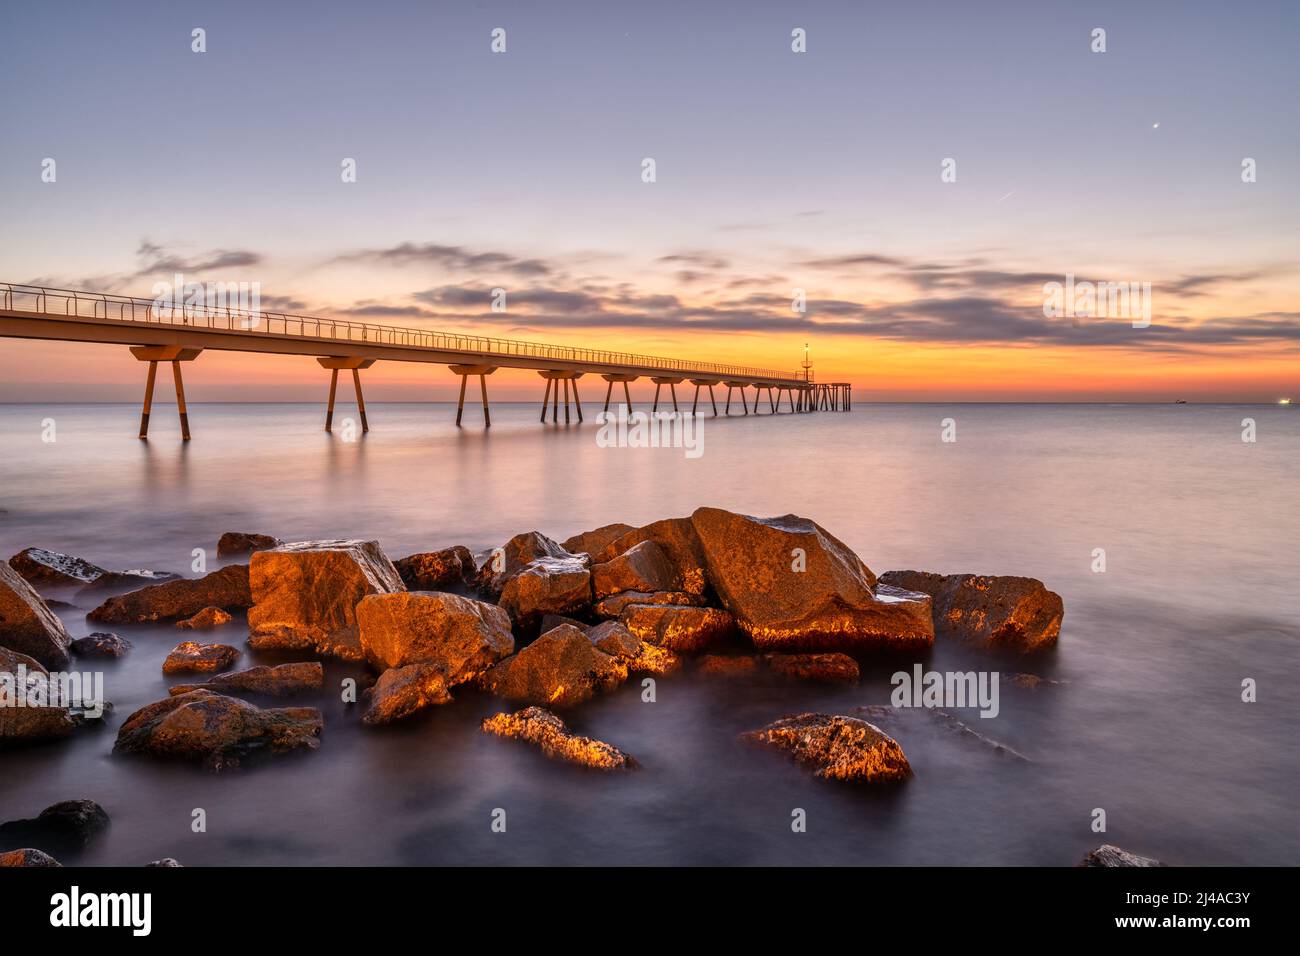 The sea pier of Badalona in Spain with some rocks before sunrise Stock Photo